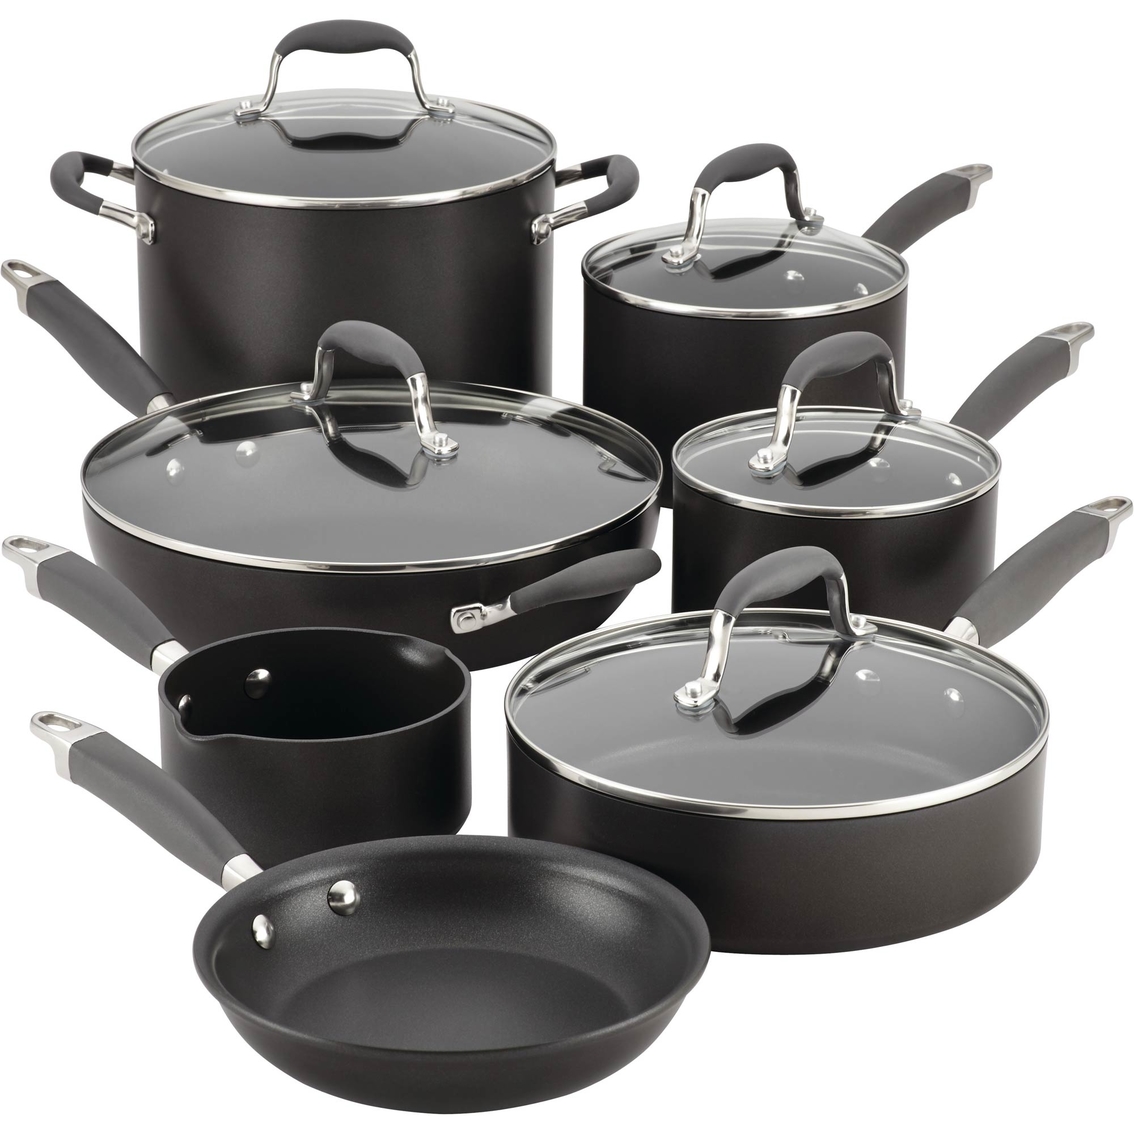 Anolon Home Hard Anodized Nonstick 11 Pc. Cookware Set, Cookware Sets, Household